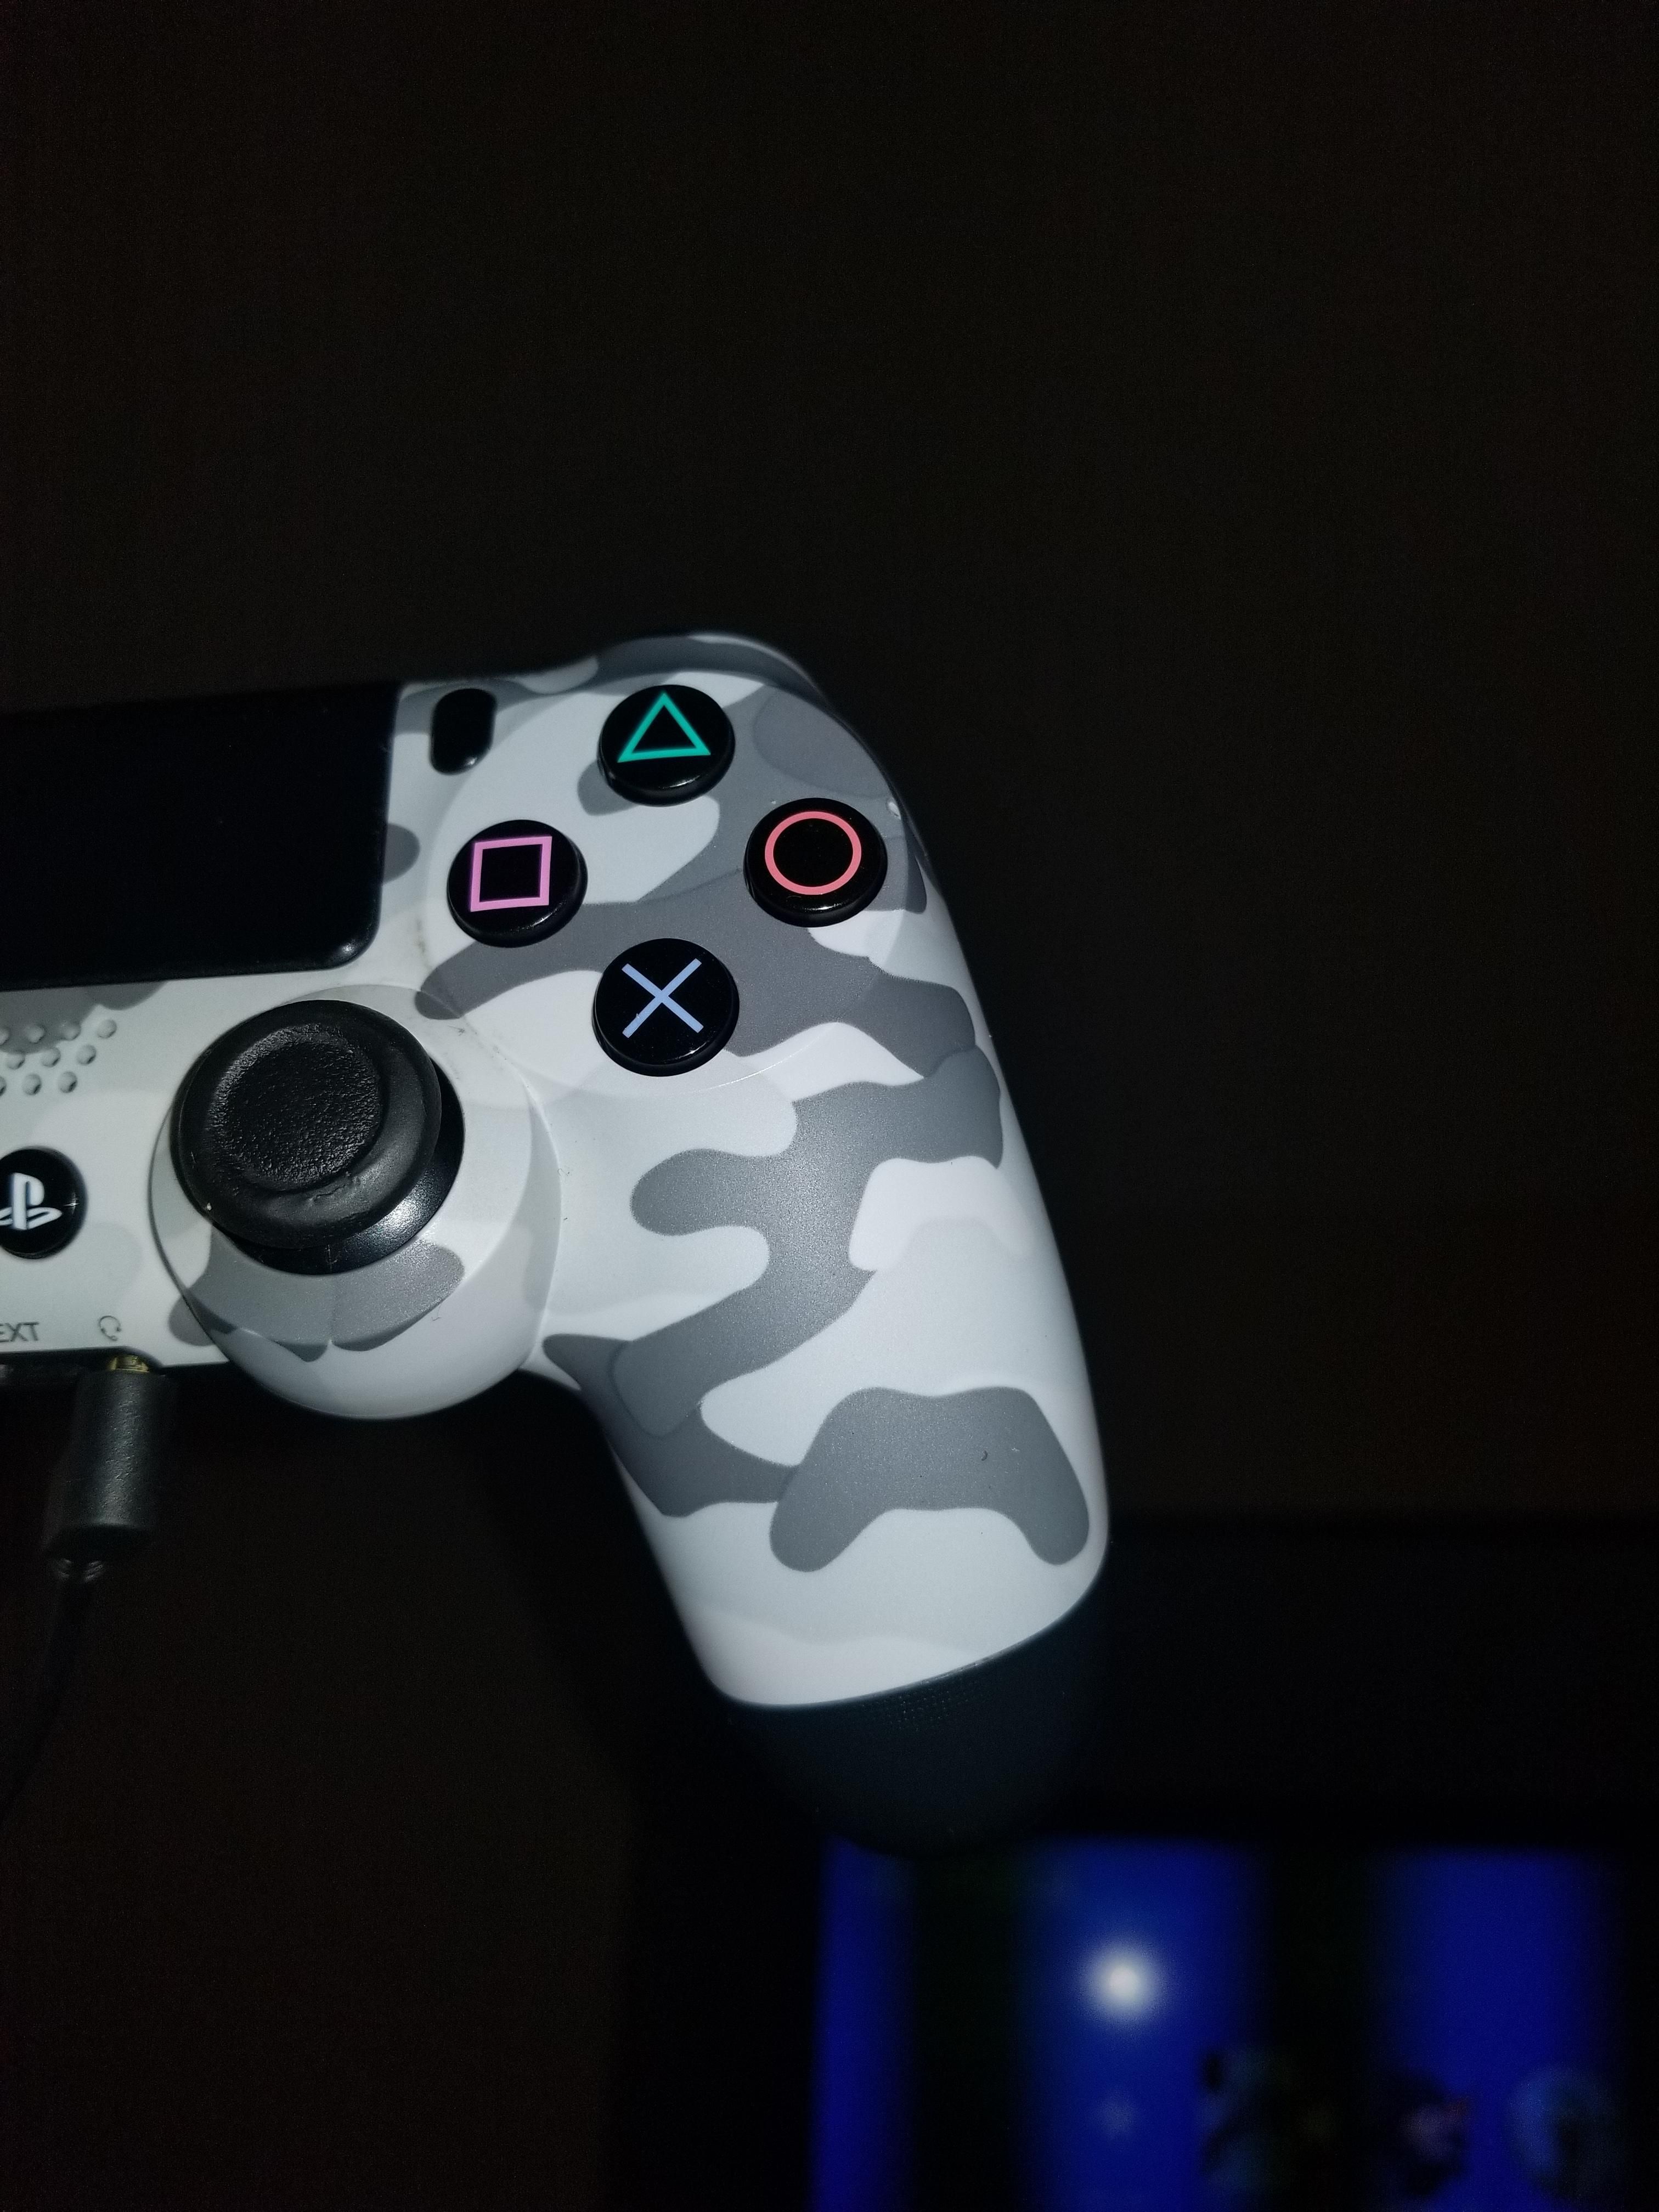 PS4 camp controllers have tiny controllers painted on them. Fotos com namorado, Imagens frases, Fotos